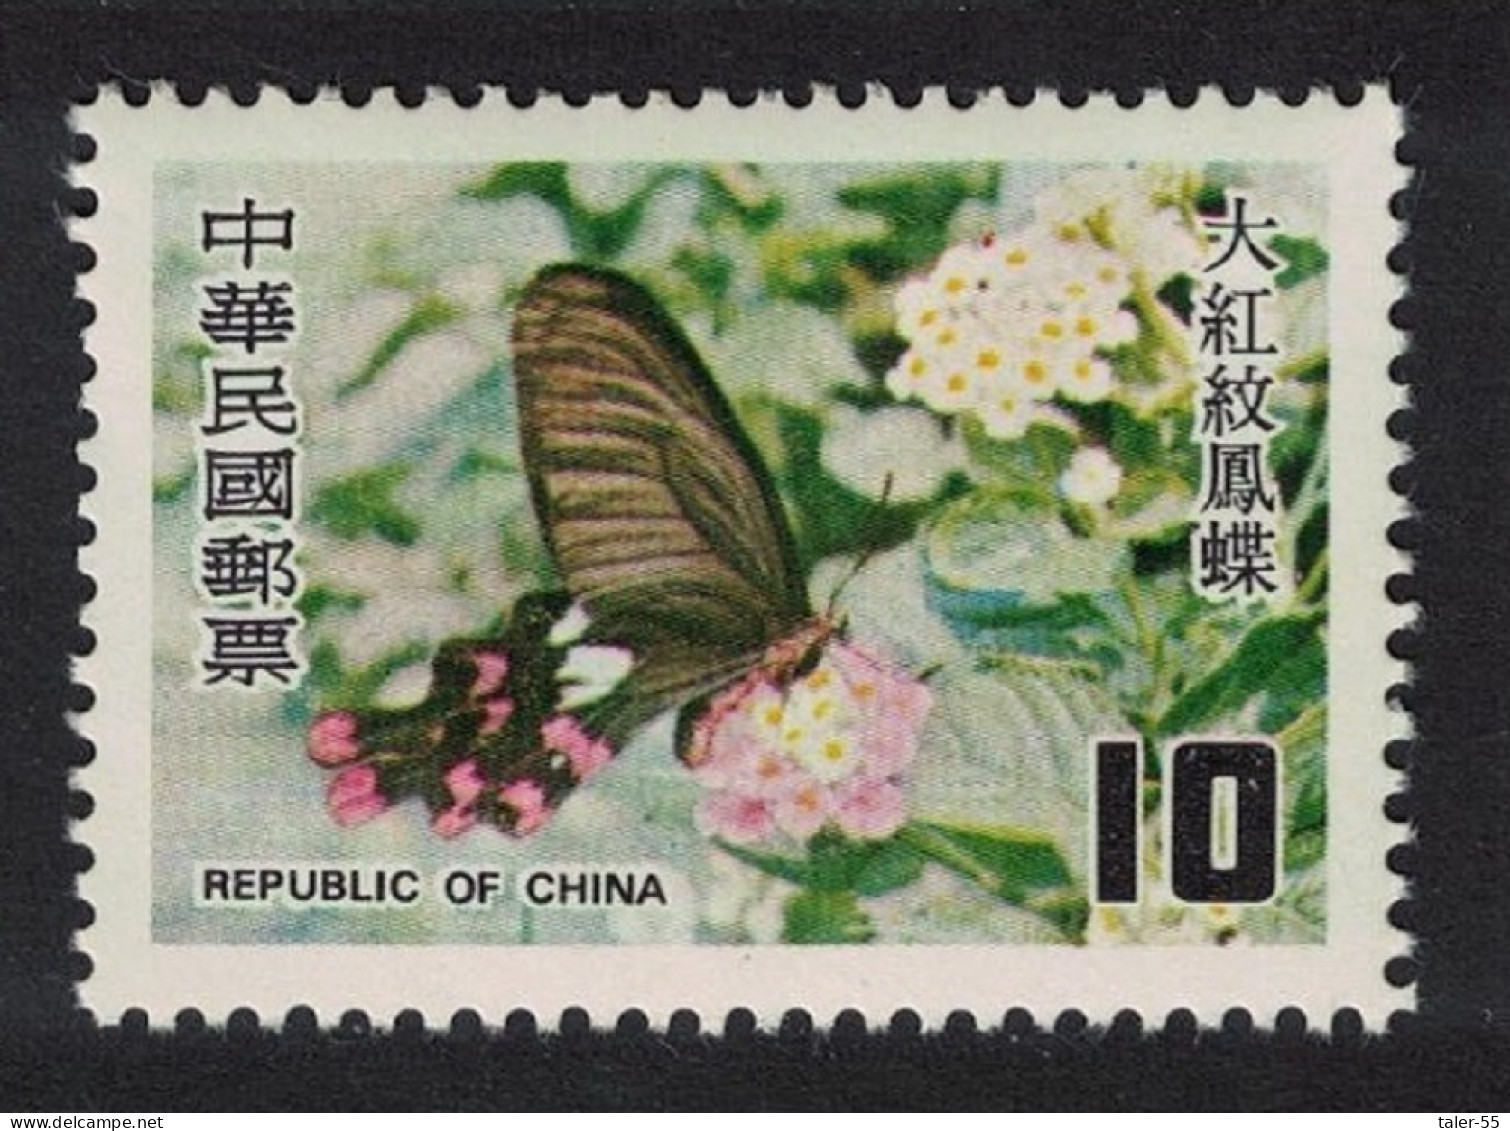 Taiwan 'Atrophaneura Polyeuctes' Butterfly $10 1978 MNH SG#1219 - Unused Stamps